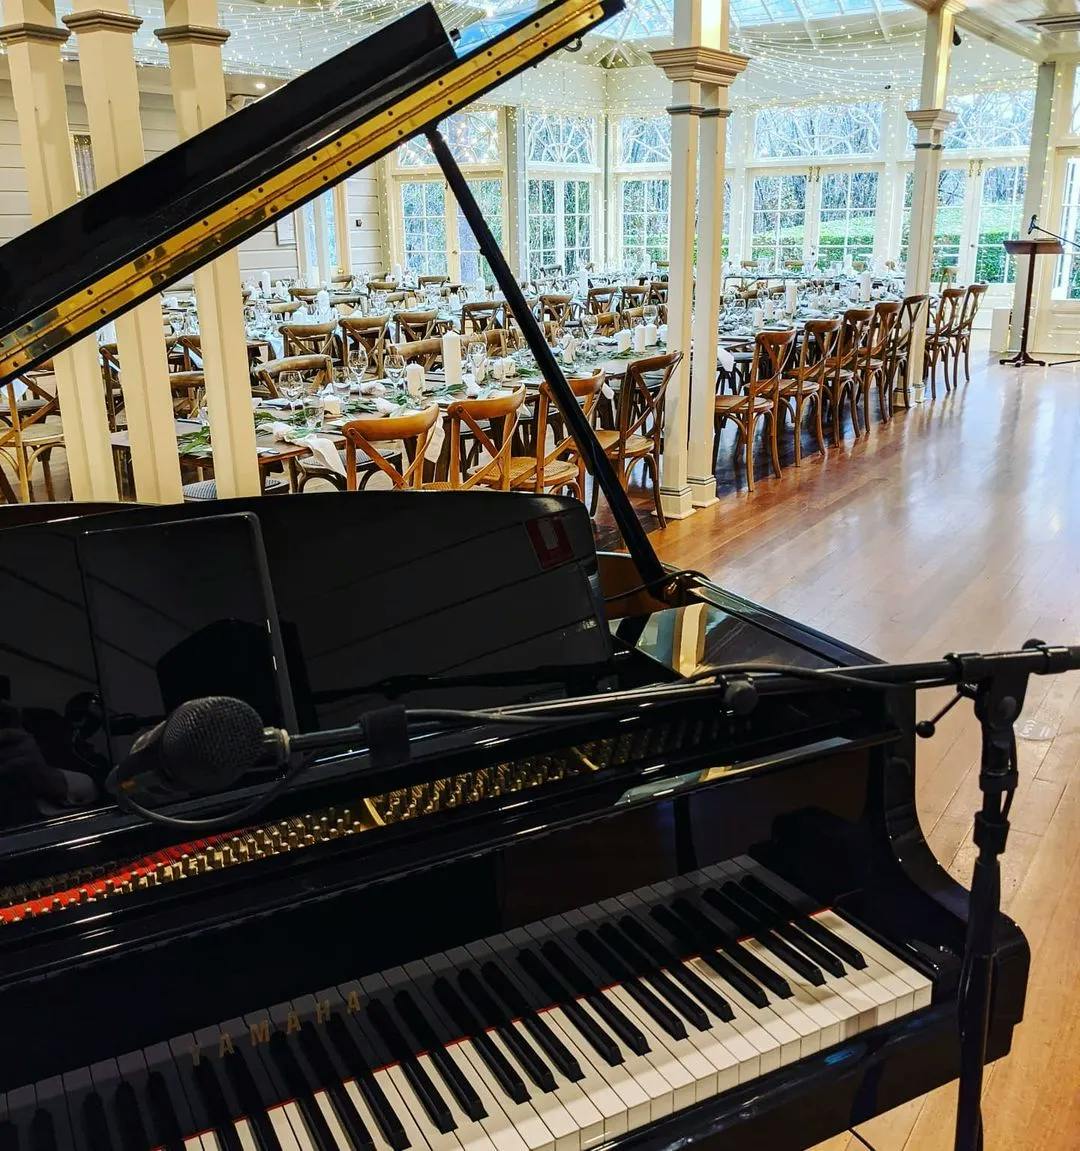 A grand piano with a microphone setup is placed in the foreground of a spacious hall with wooden floors. The hall is decorated with long banquet tables and wooden chairs, set for an event, and large windows letting in natural light.